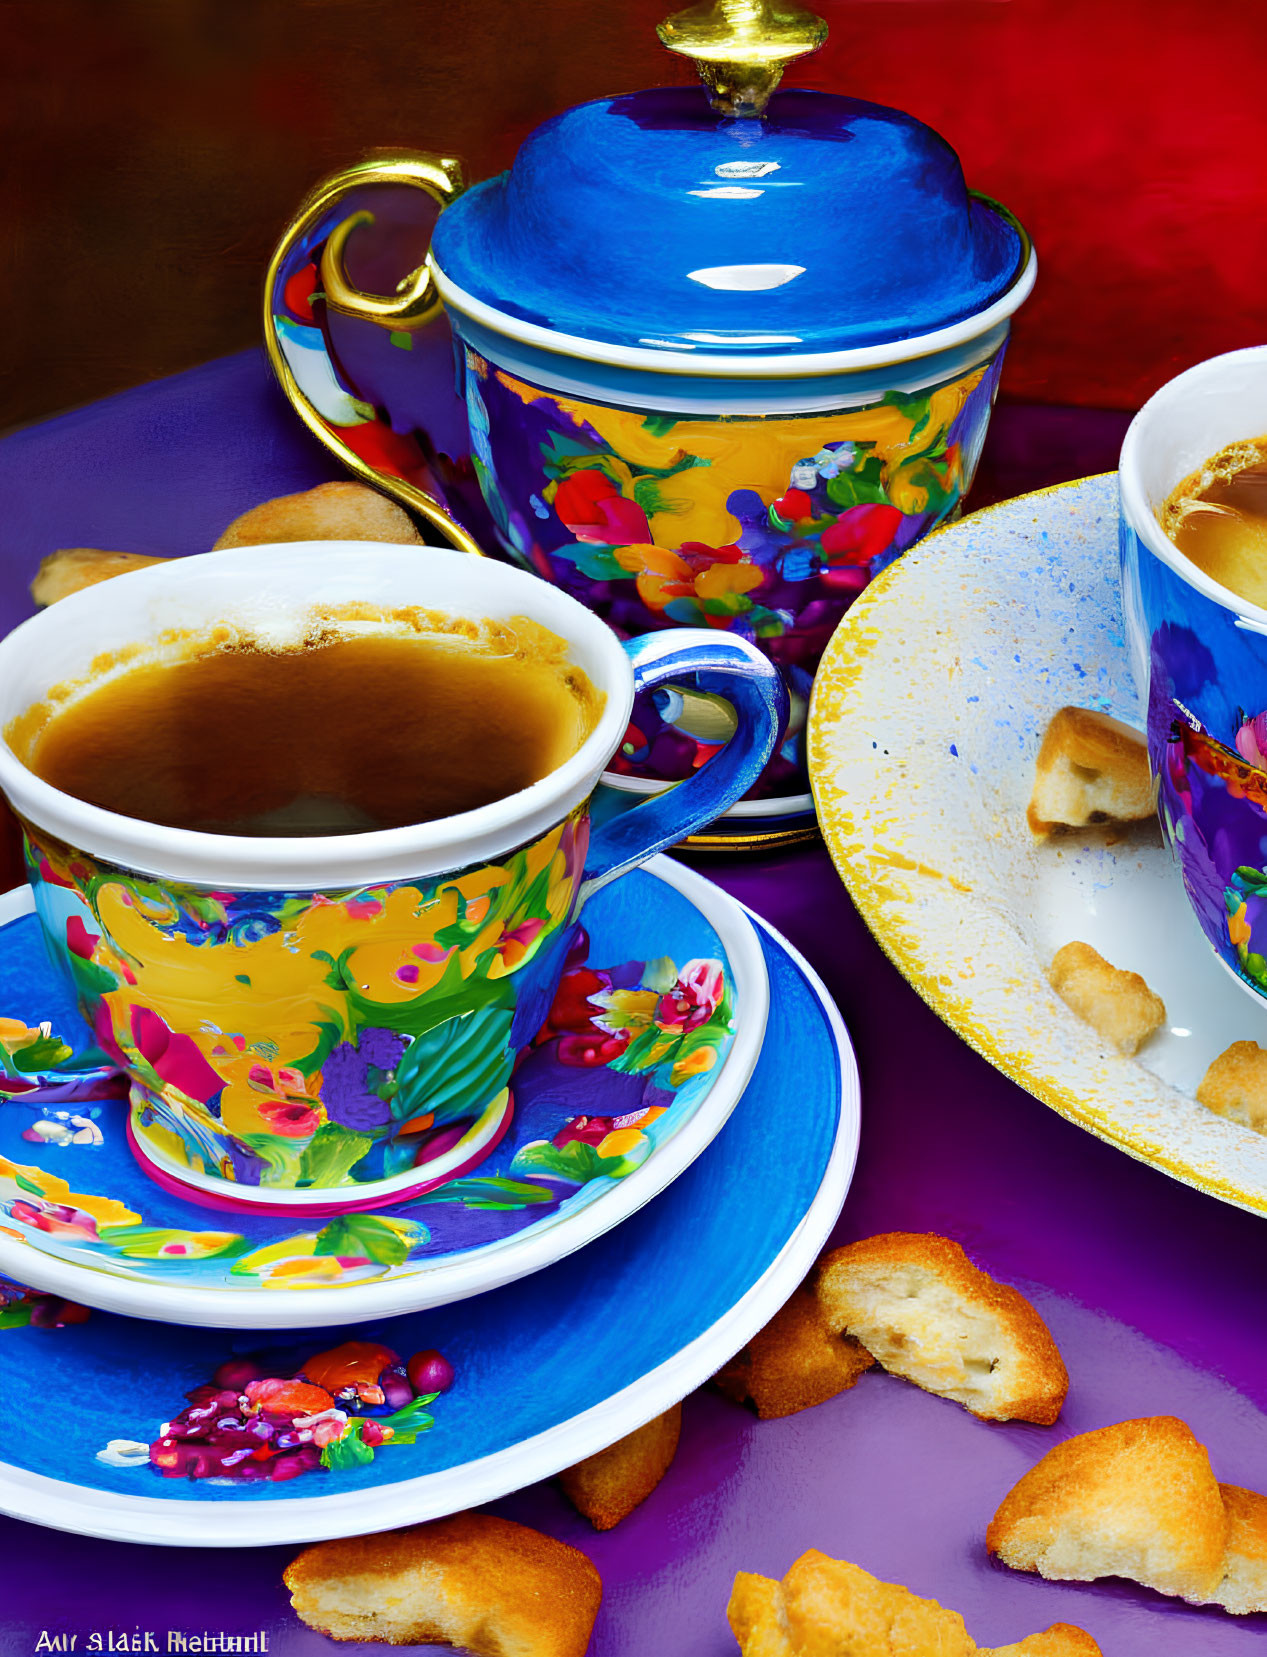 Colorful Floral Tea Set with Blue Teapot, Cups, Saucers, and Biscuits